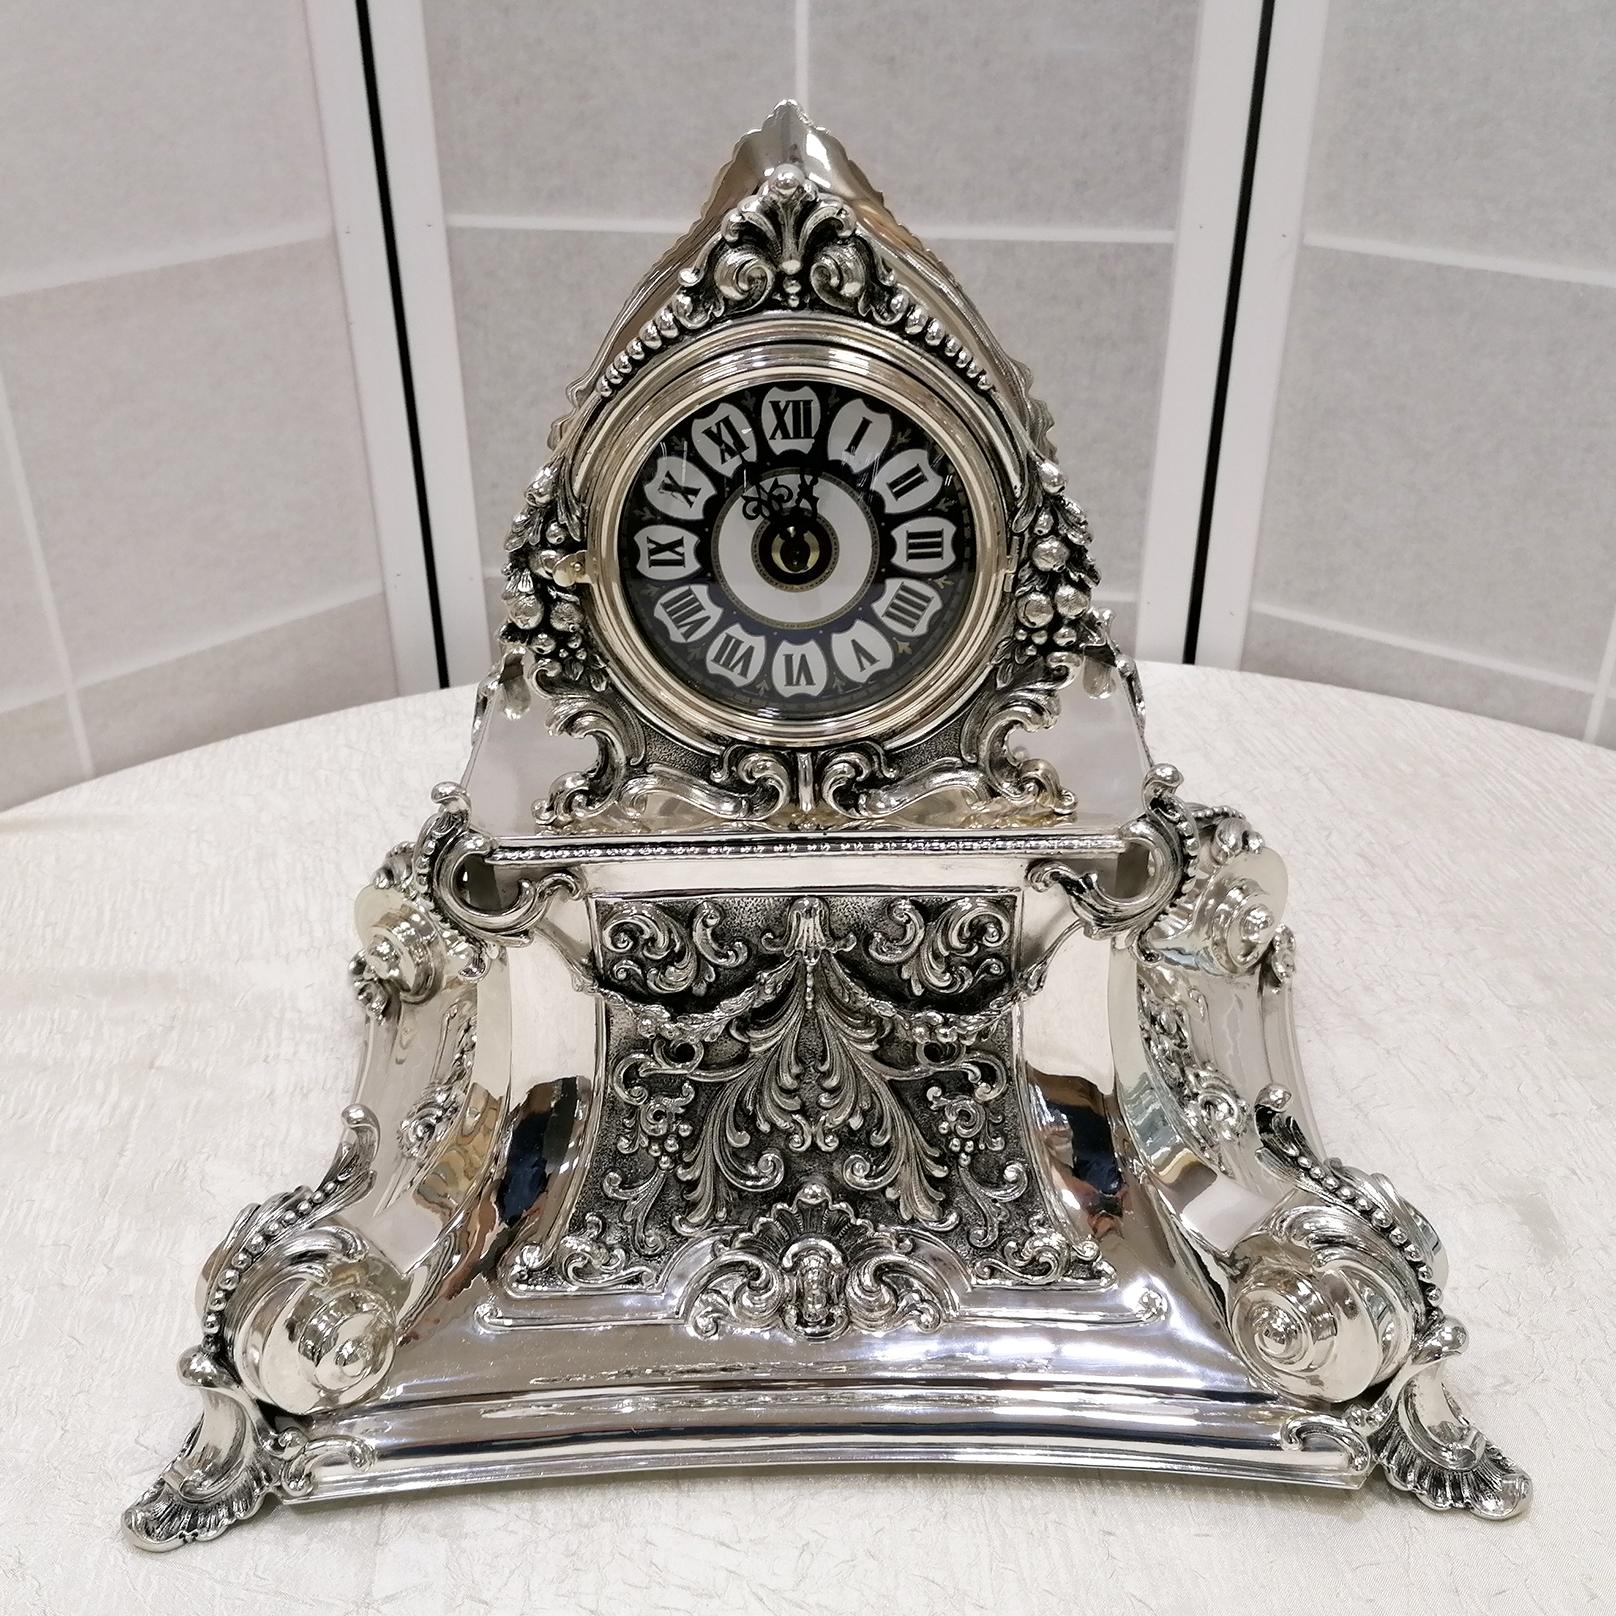 An Italian Baroque style Table Clock, it is made of embossed sheet silver with typical Baroque style swirls. Cast details decorate its four sides and the crown.
The clock-face is enameled ceramic and the movement is mechanical.
Solid laquered silver